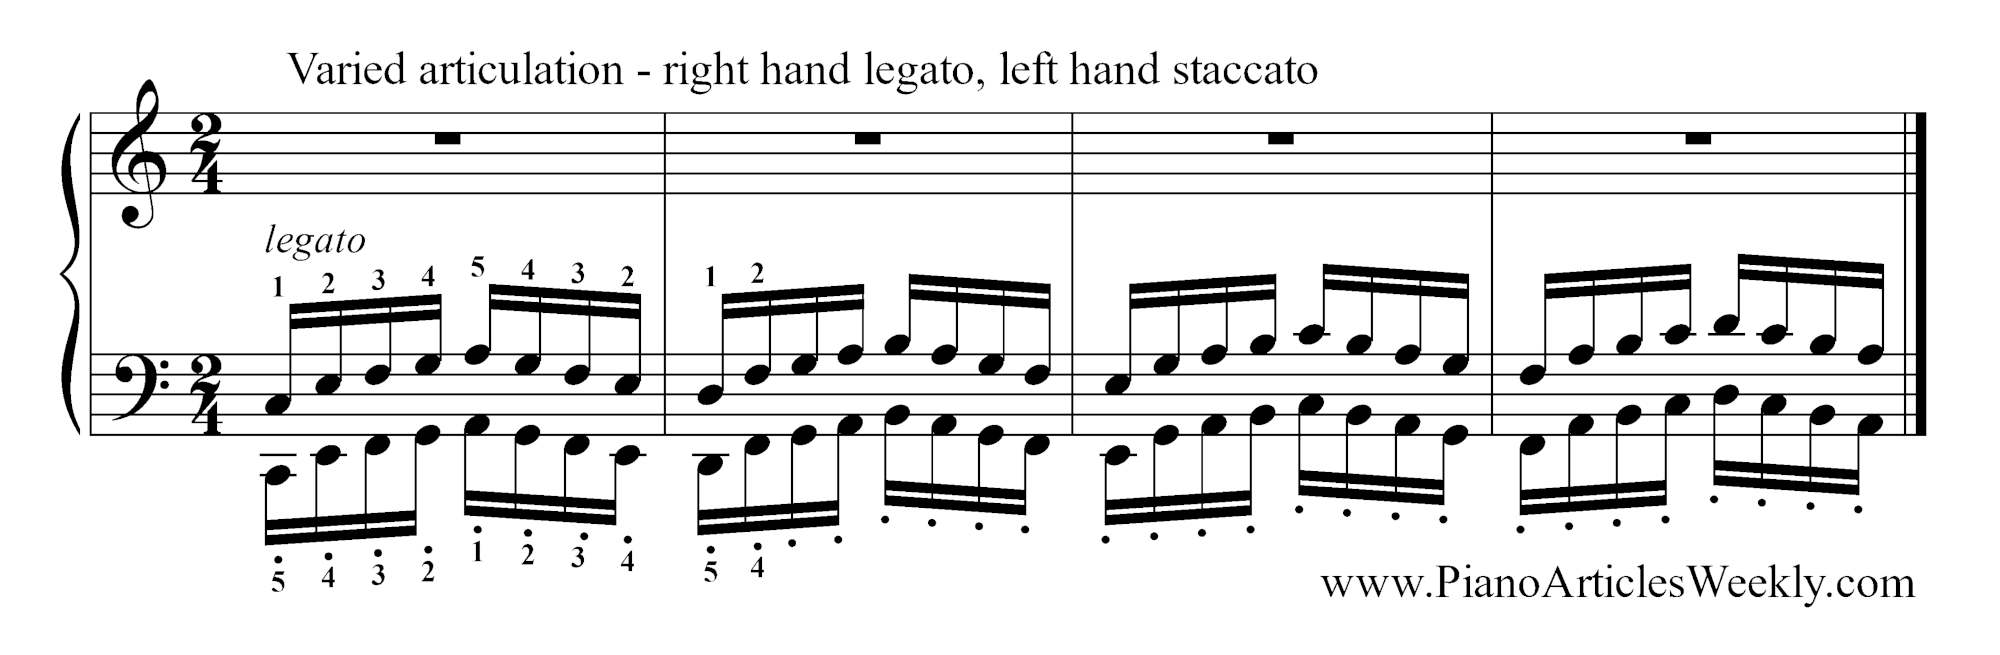 Hanon-Exercise-varied-varied-articulation-left-hand-staccato-right-hand-legato